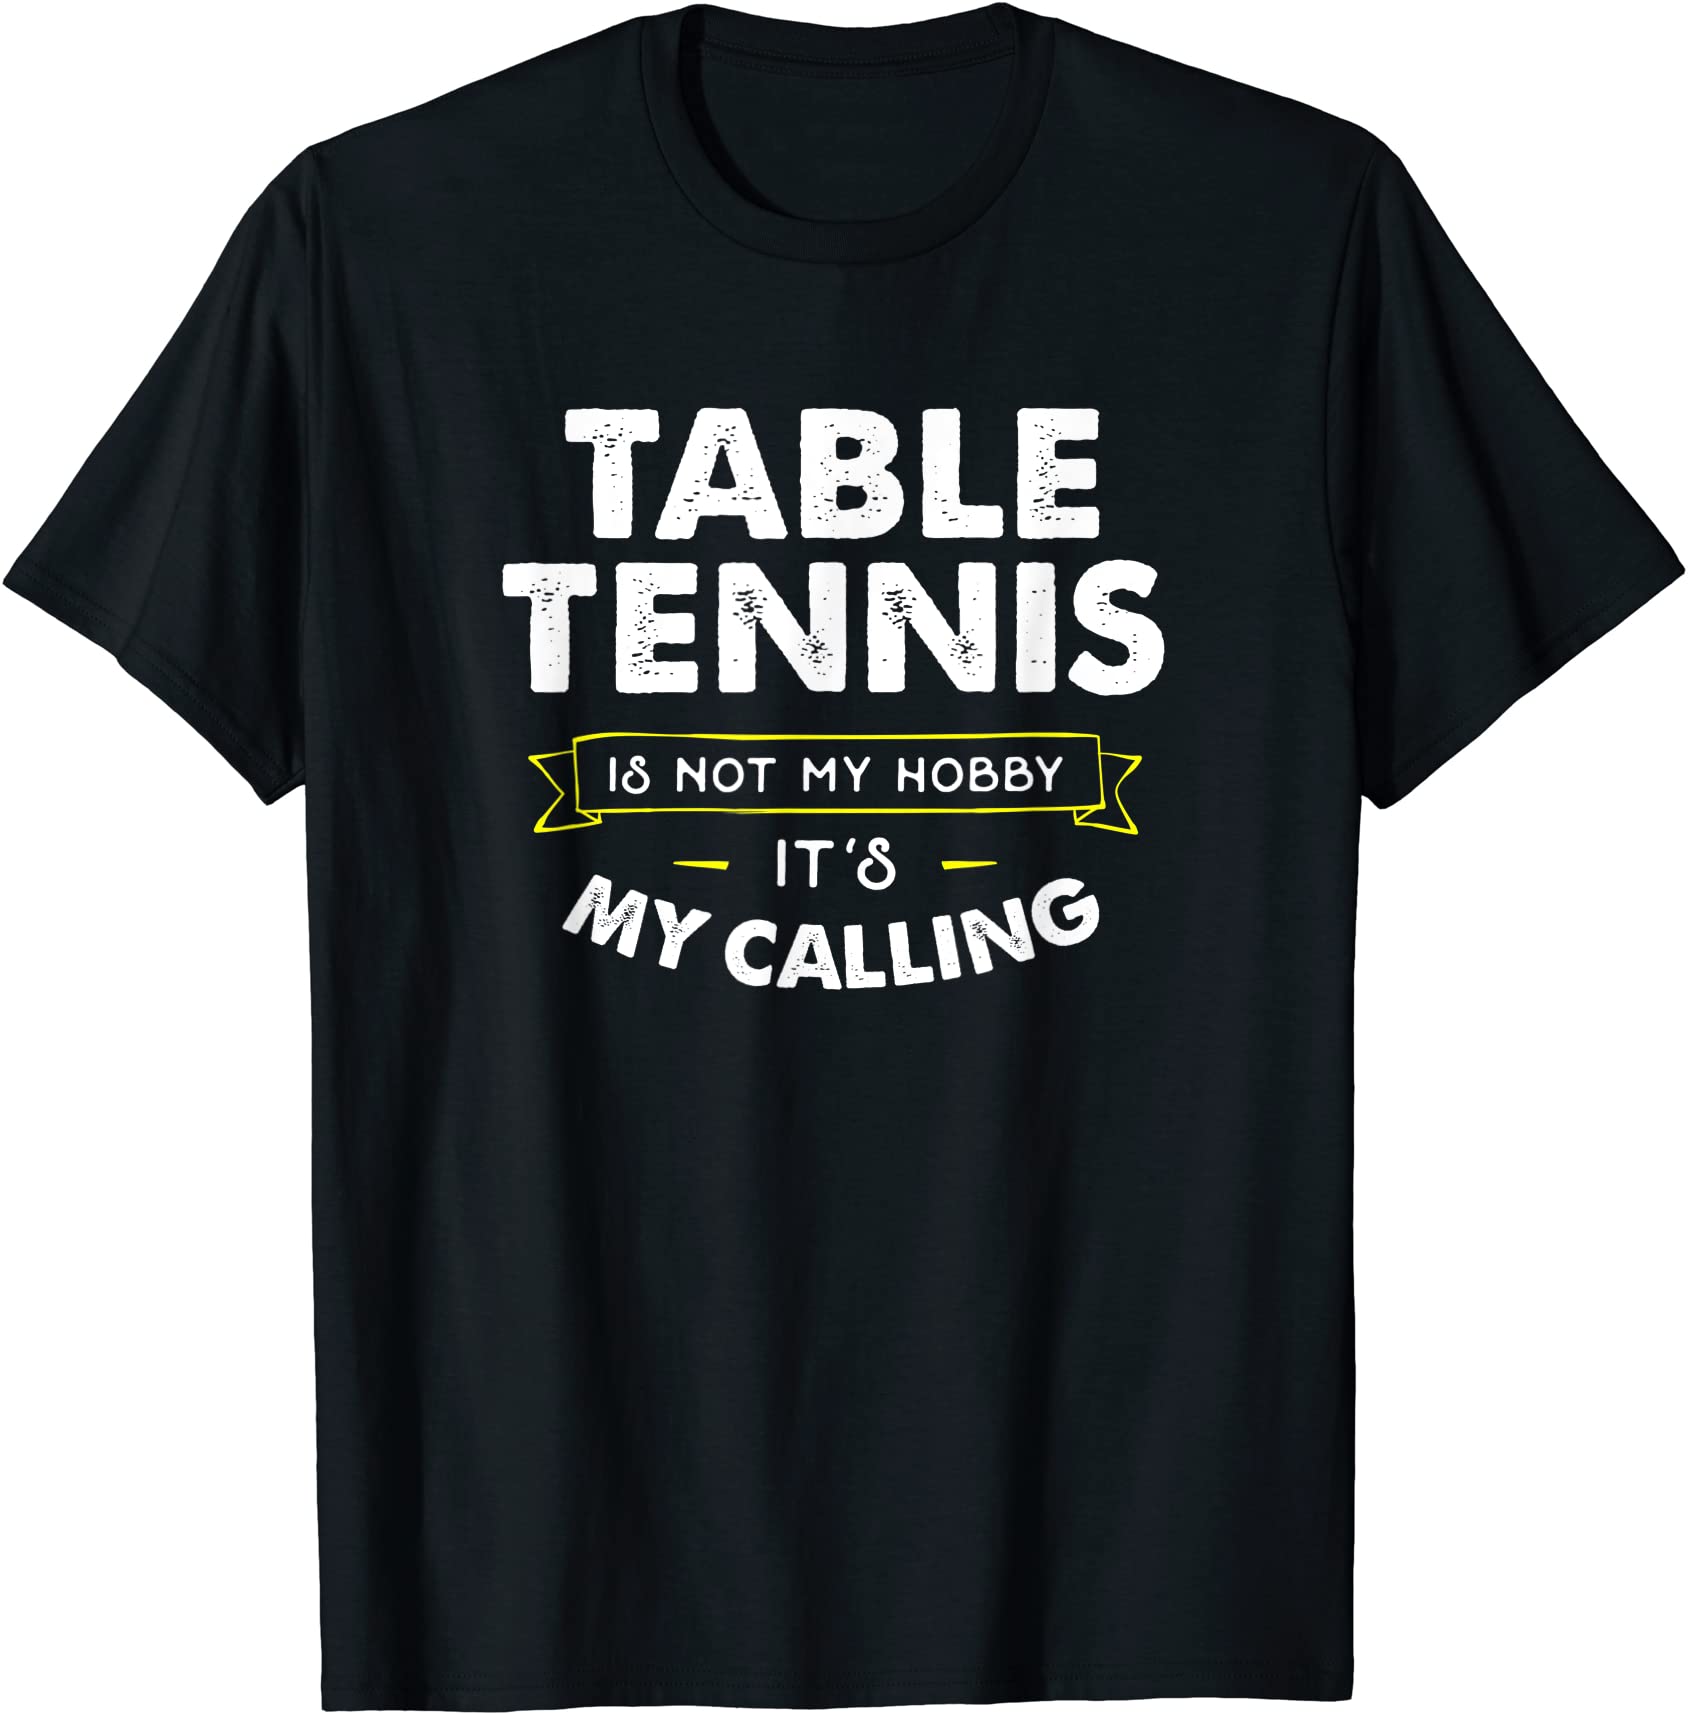 table tennis t shirt for table tennis player my calling men - Buy t ...